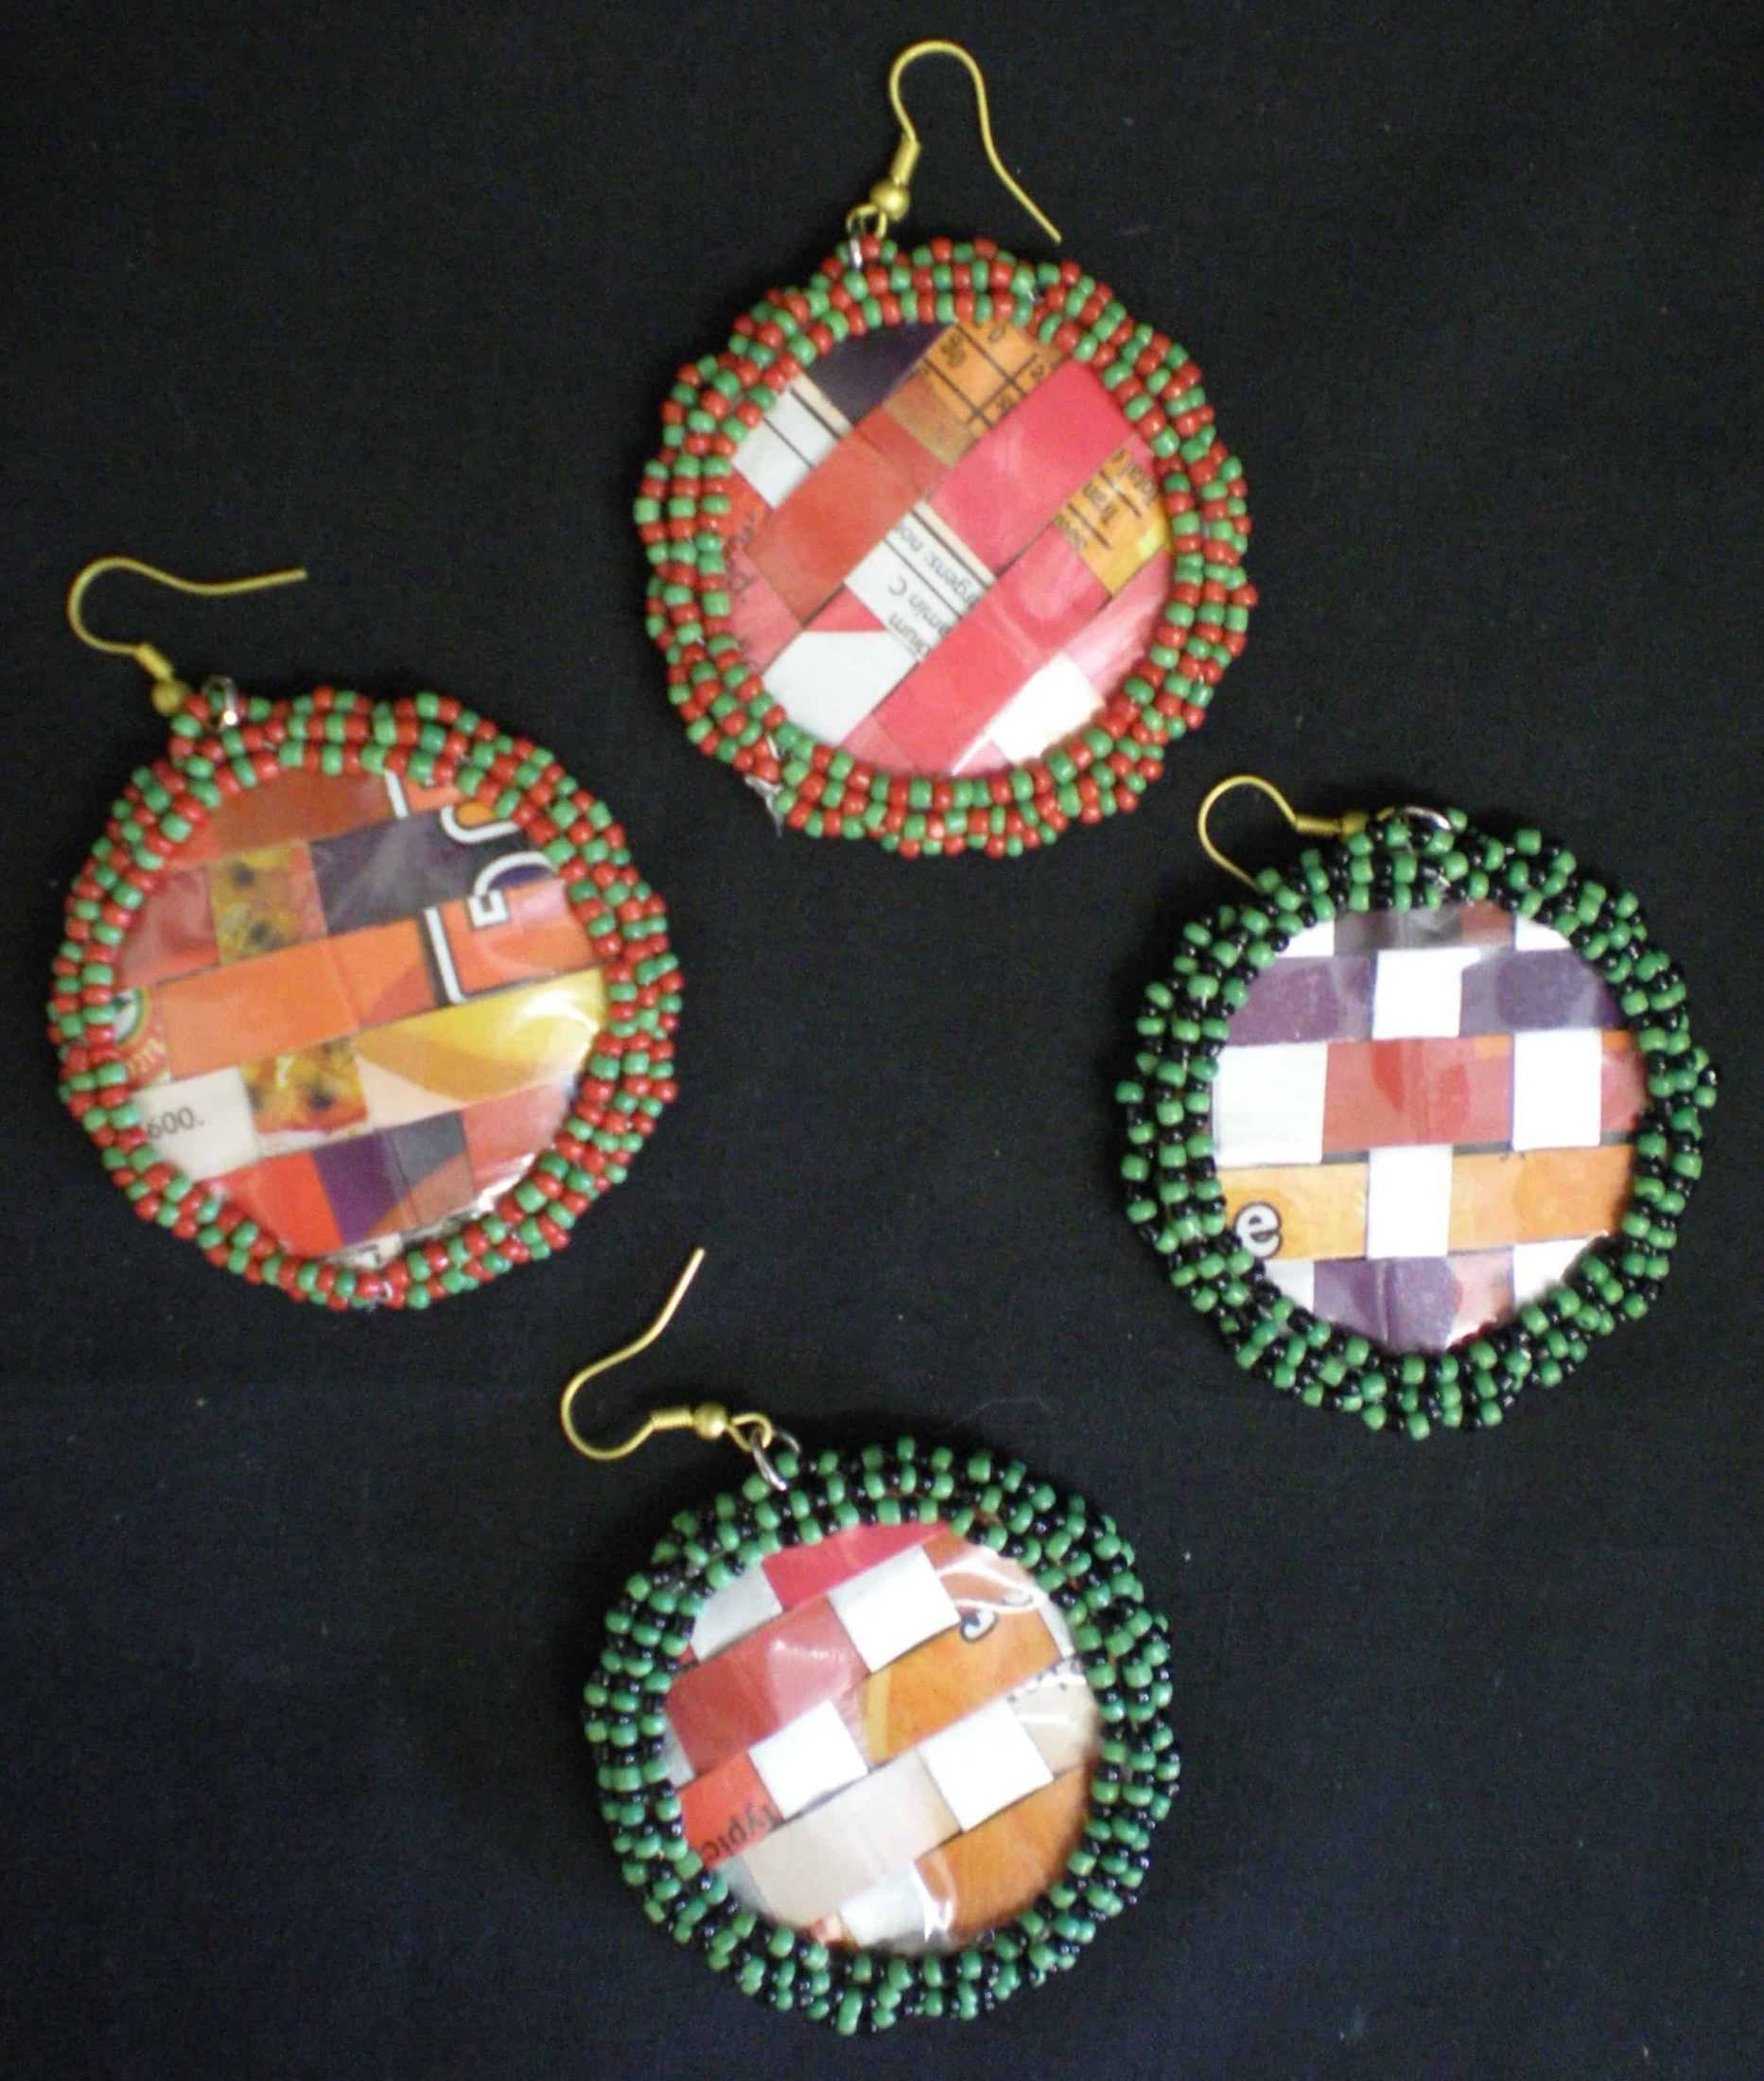 woven tetrapack earrings - African Home